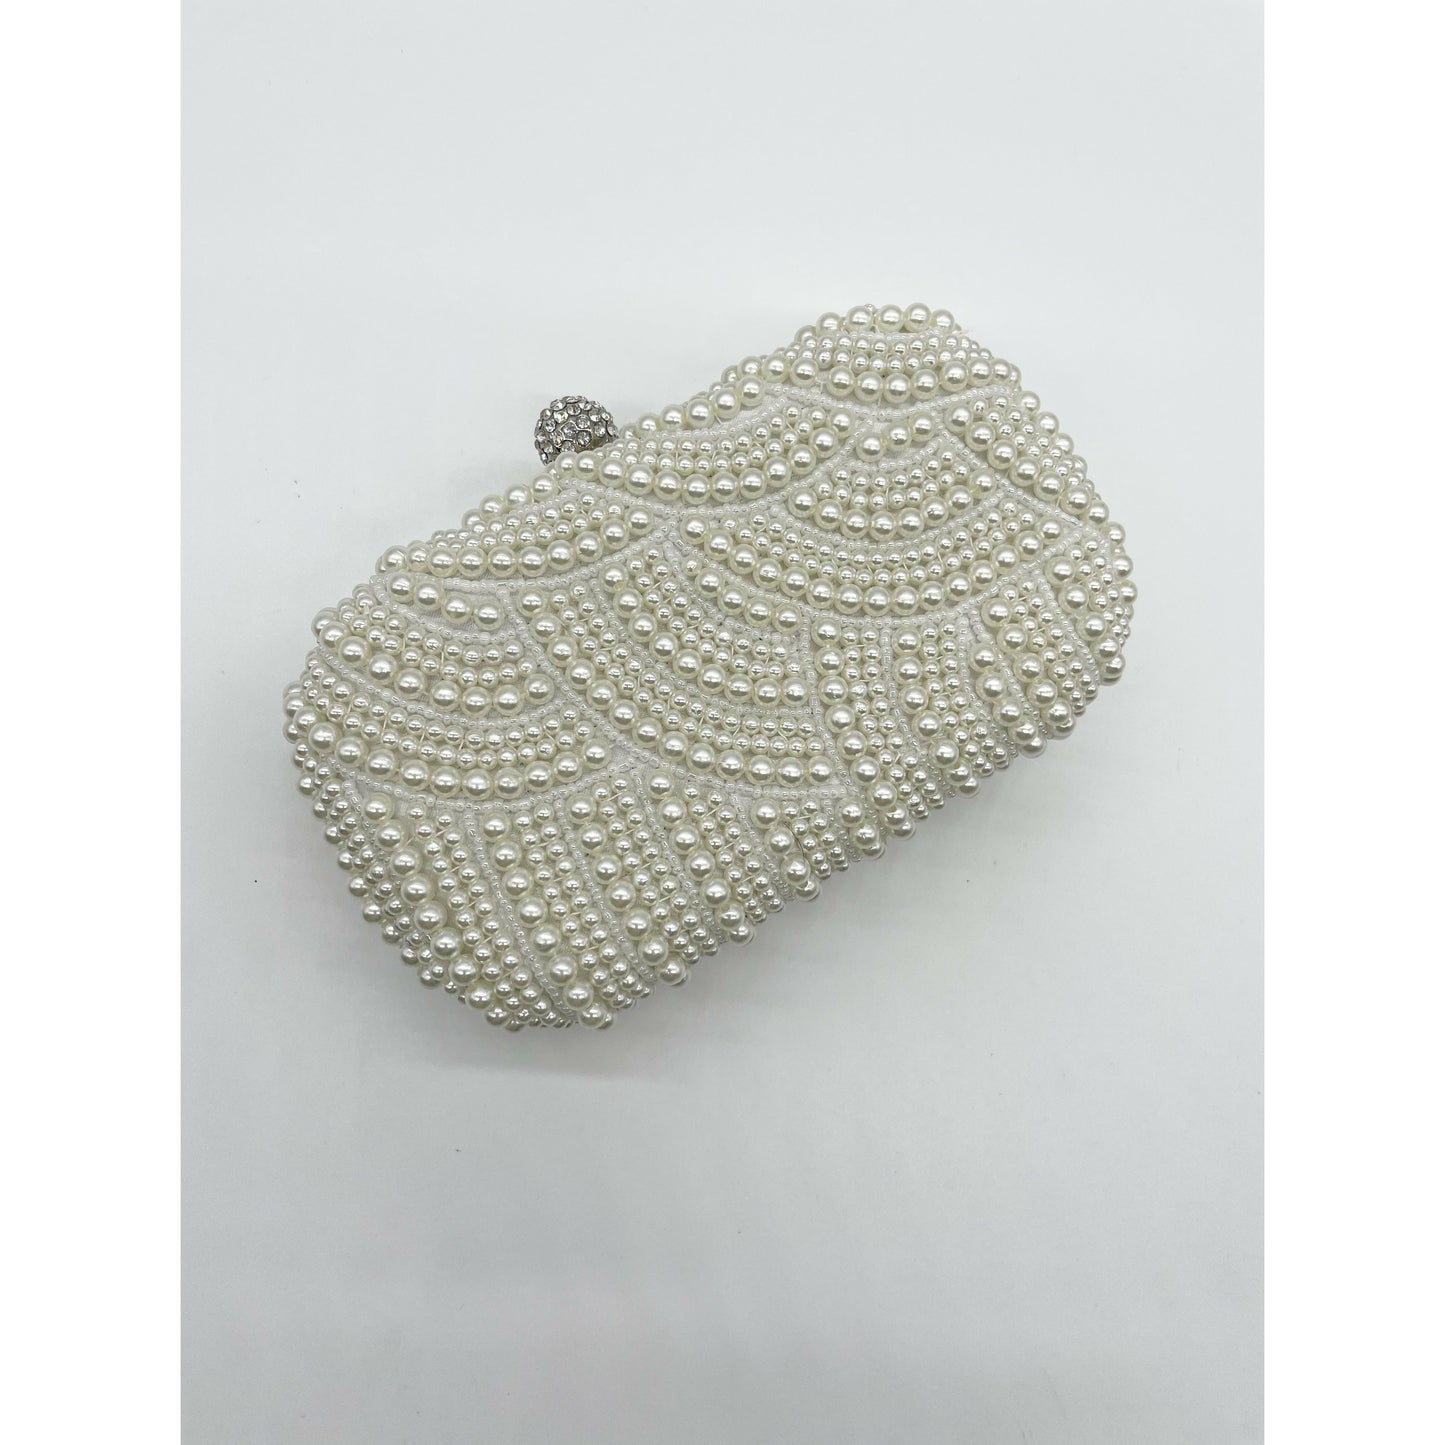 Sally pearl square clutch